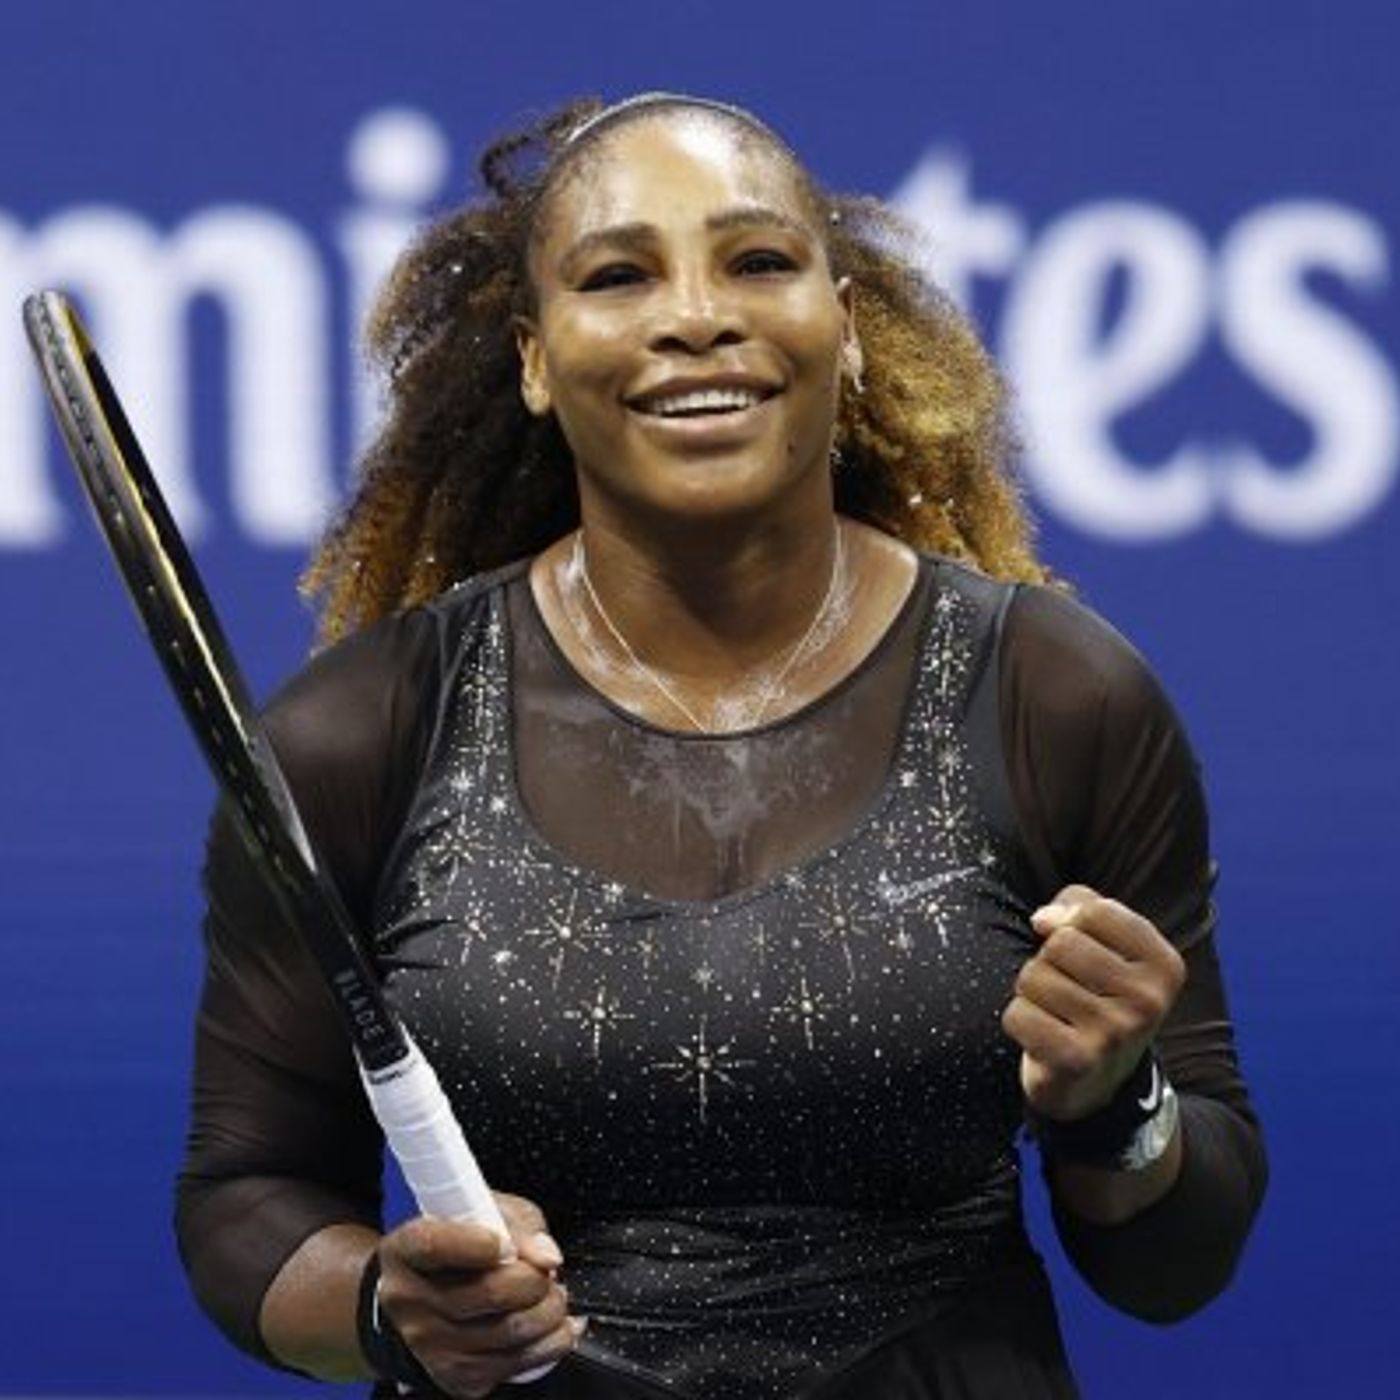 Serena Williams Wins a Thrilling 2nd Round US Open Match in Her Last Dance.  Sports Illustrated's Jon Wertheim Joins to DIscuss the Excitement